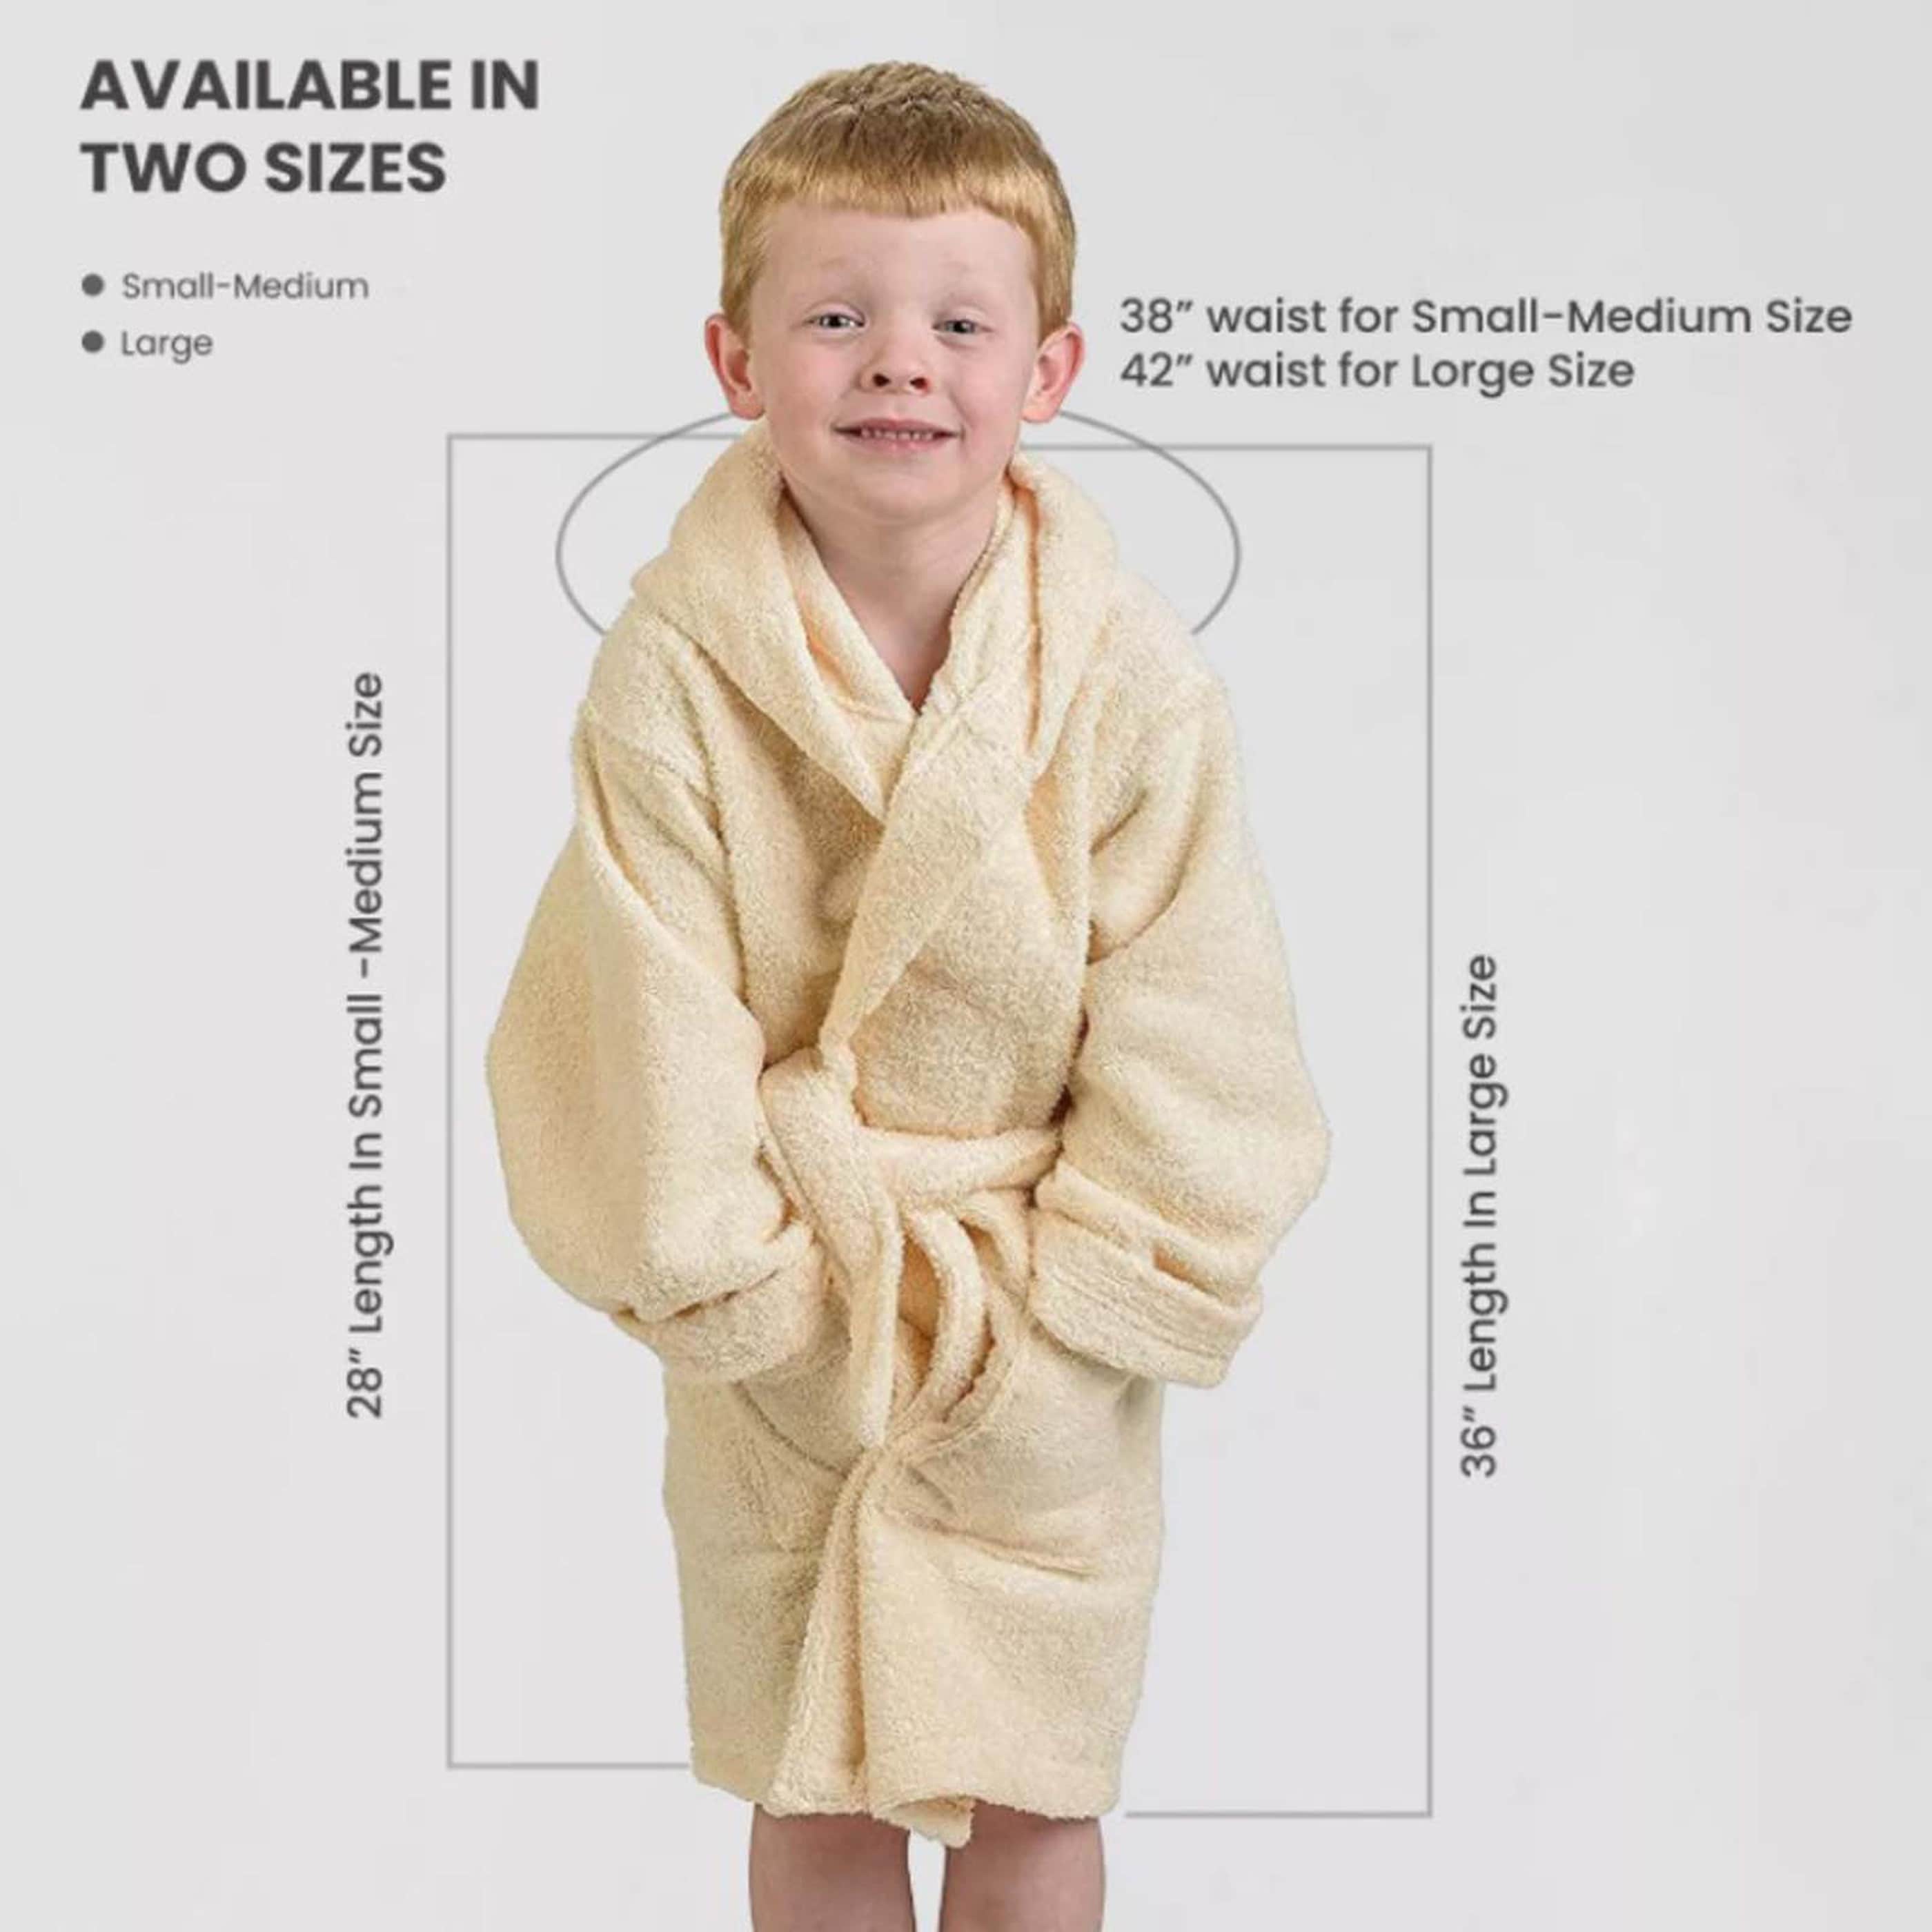 Holiday Gift Guide: Top Baby Picks for 2015 | Baby bath robe, Baby robes,  Baby hooded bath towel